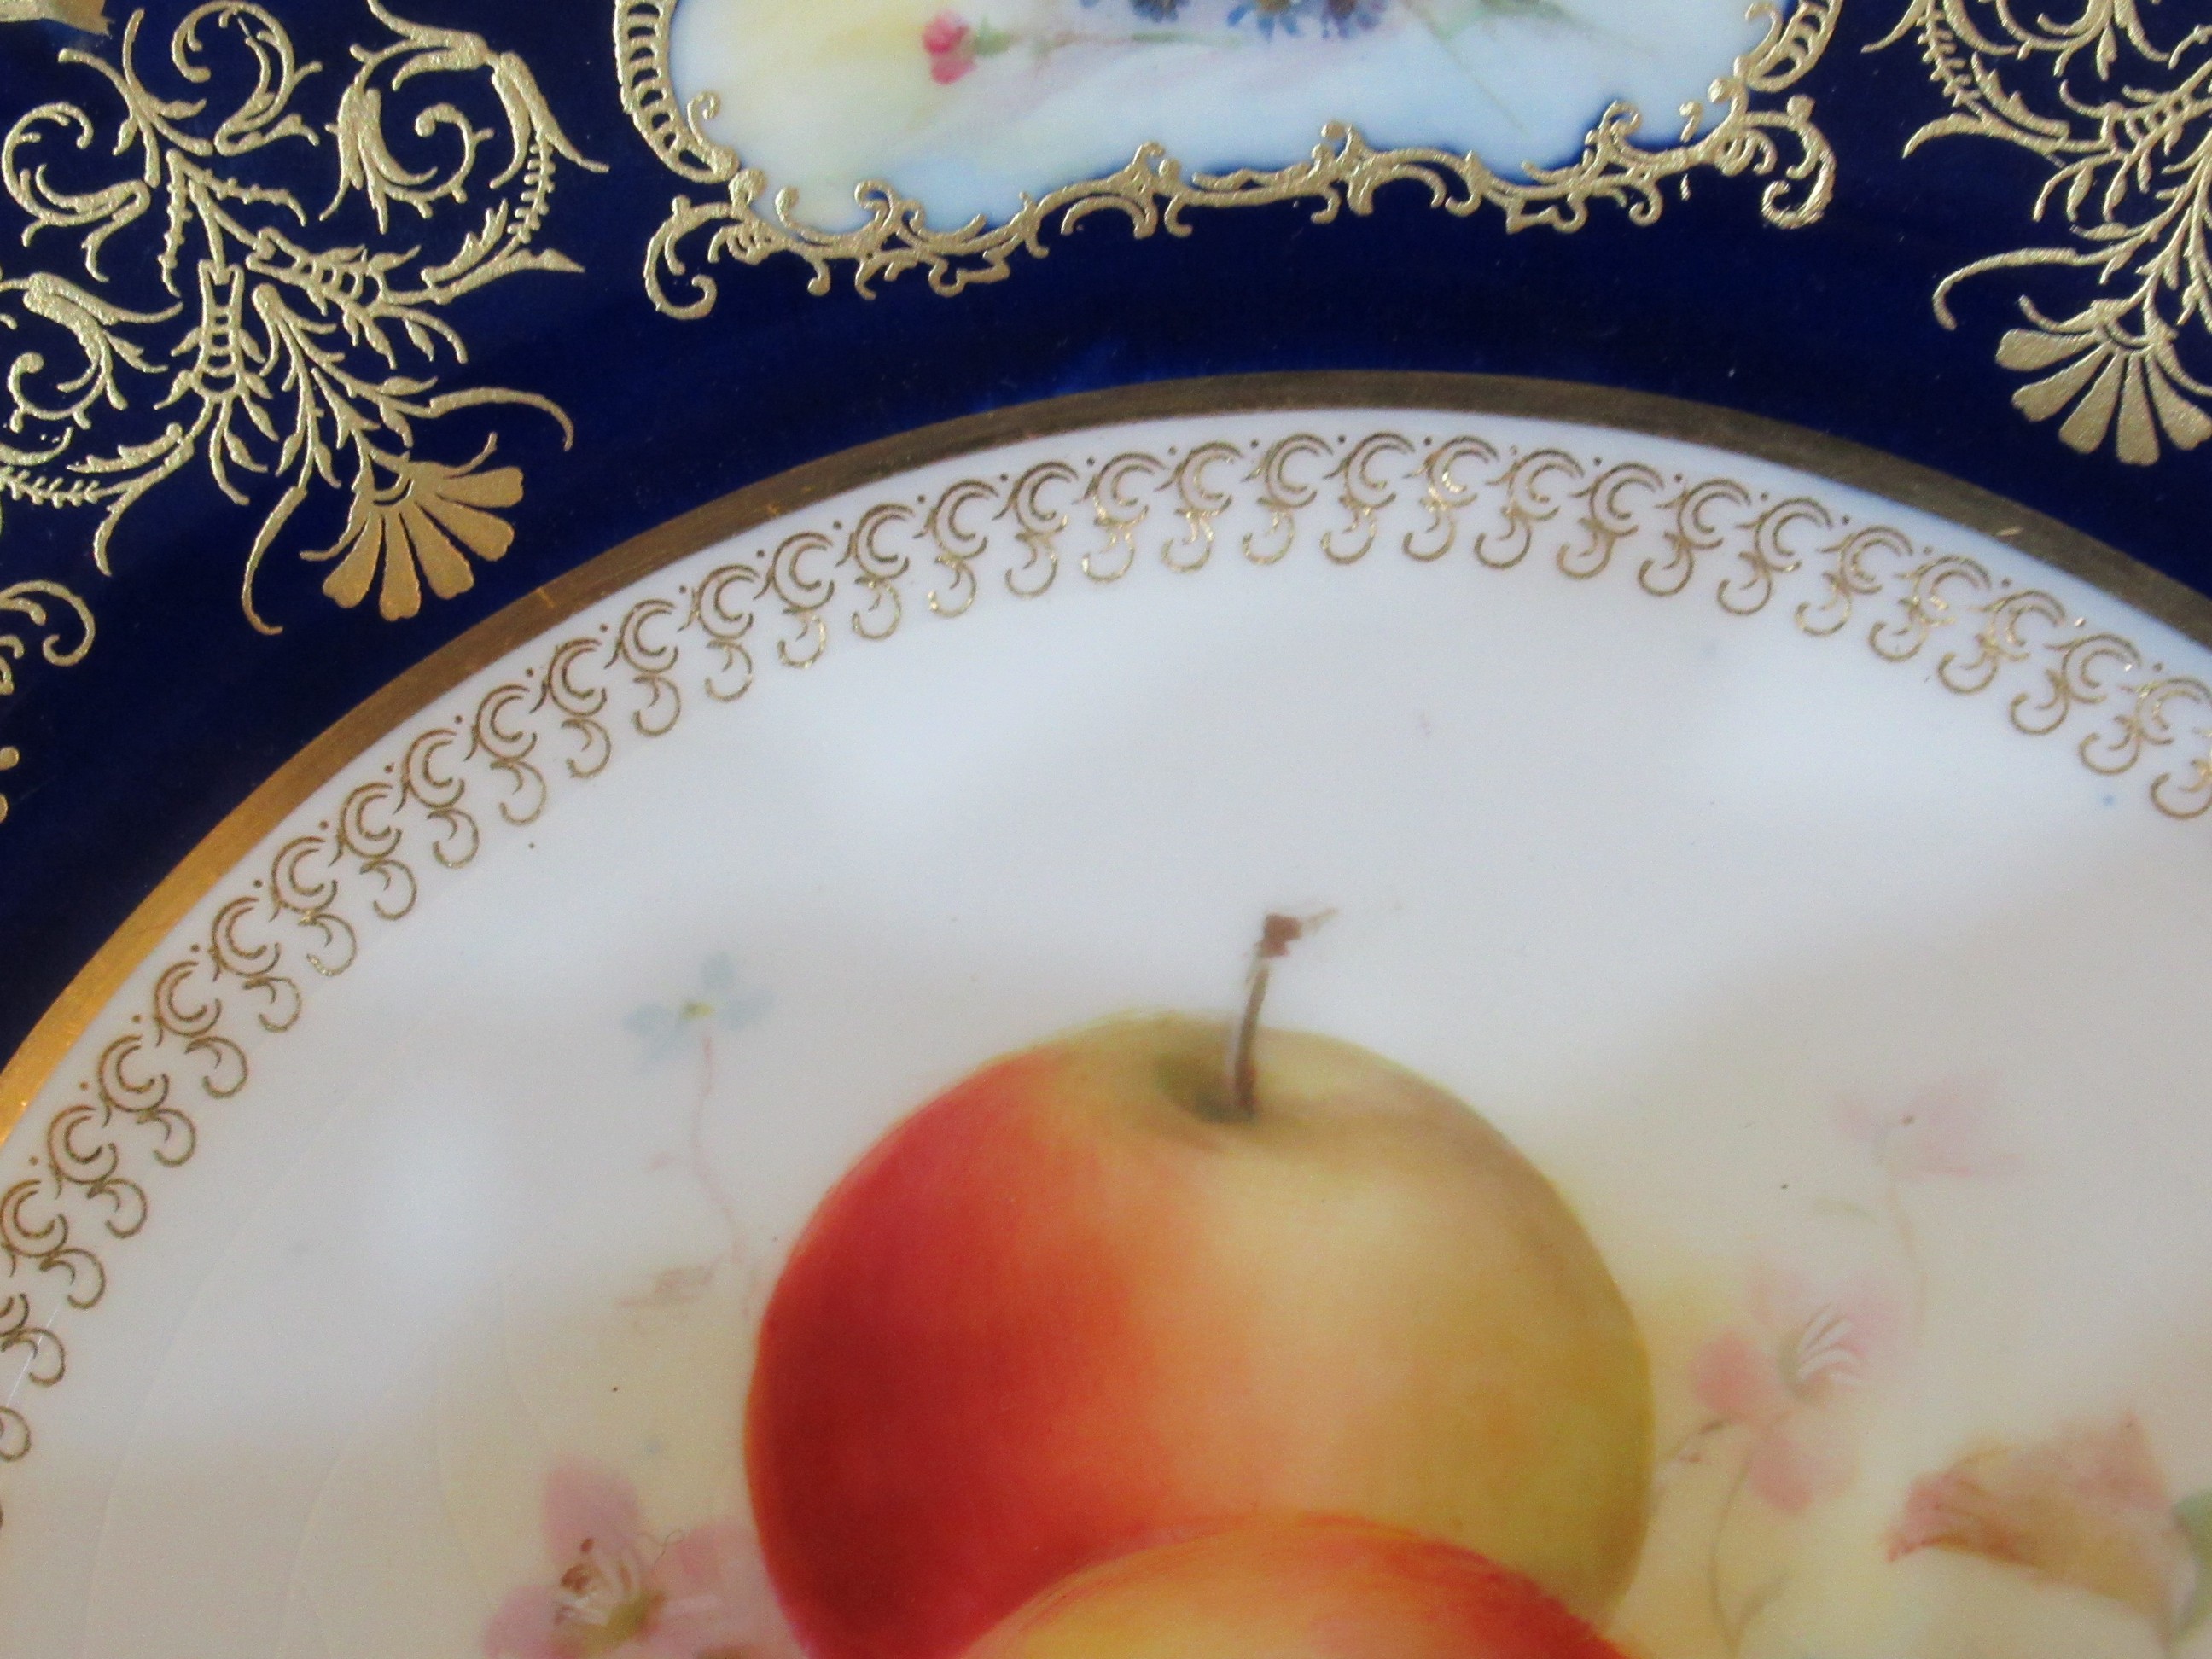 Royal Worcester porcelain cabinet plate hand painted with fruits and foliage with cobalt blue border - Image 4 of 6